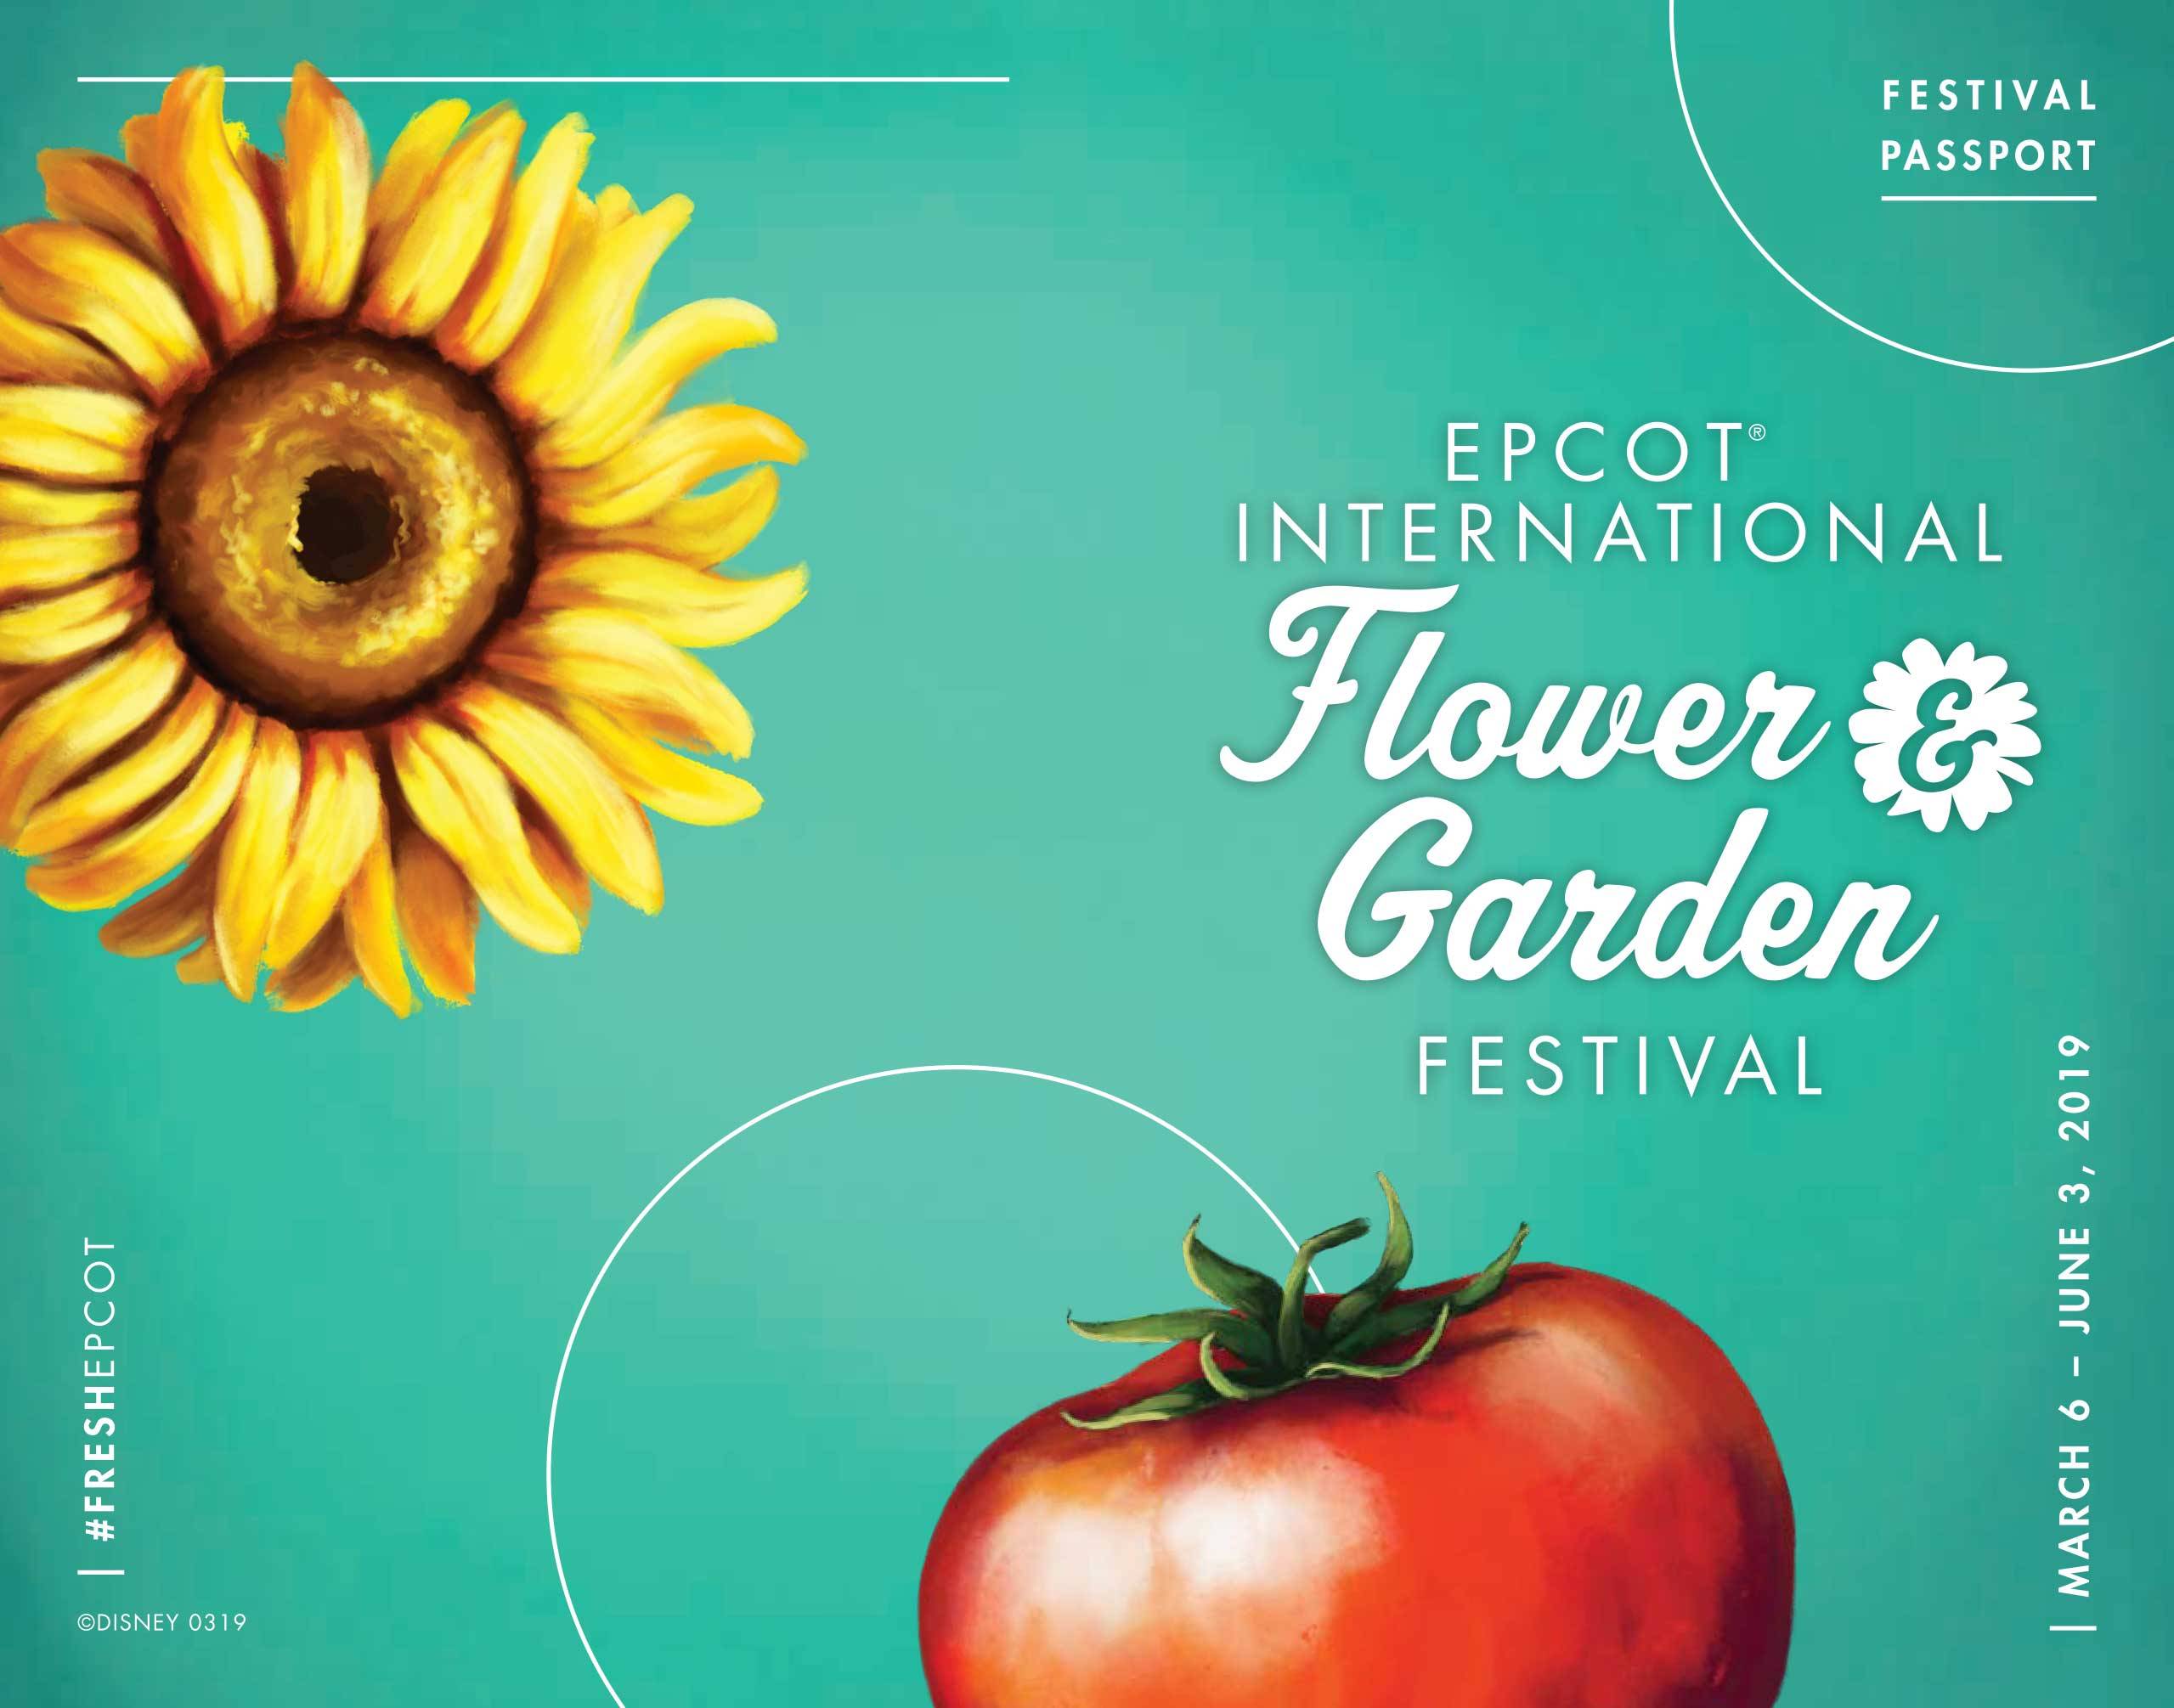 PHOTOS - Times guide and Festival Passport for the 2019 Epcot International Flower and Garden Festival